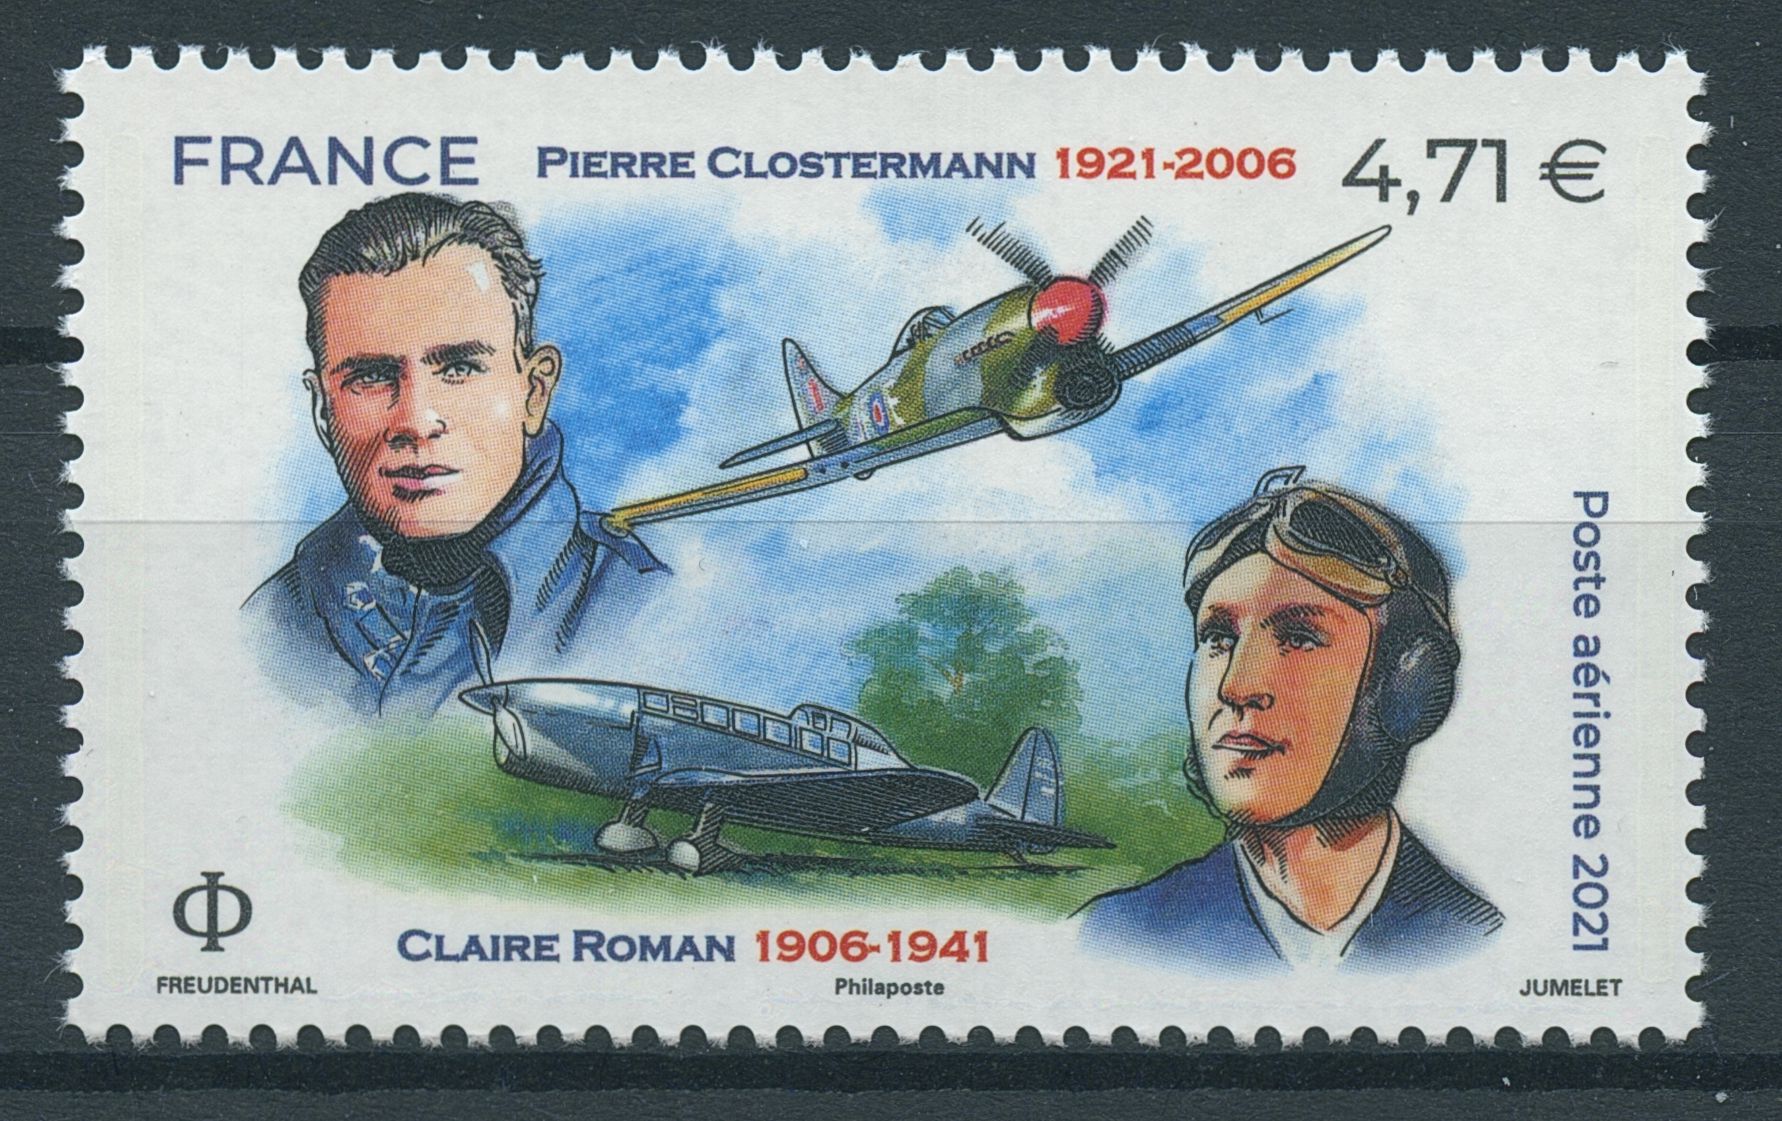 France 2021 MNH Aviation Stamps Claire Roman Pierre Clostermann Airmail 1v Set